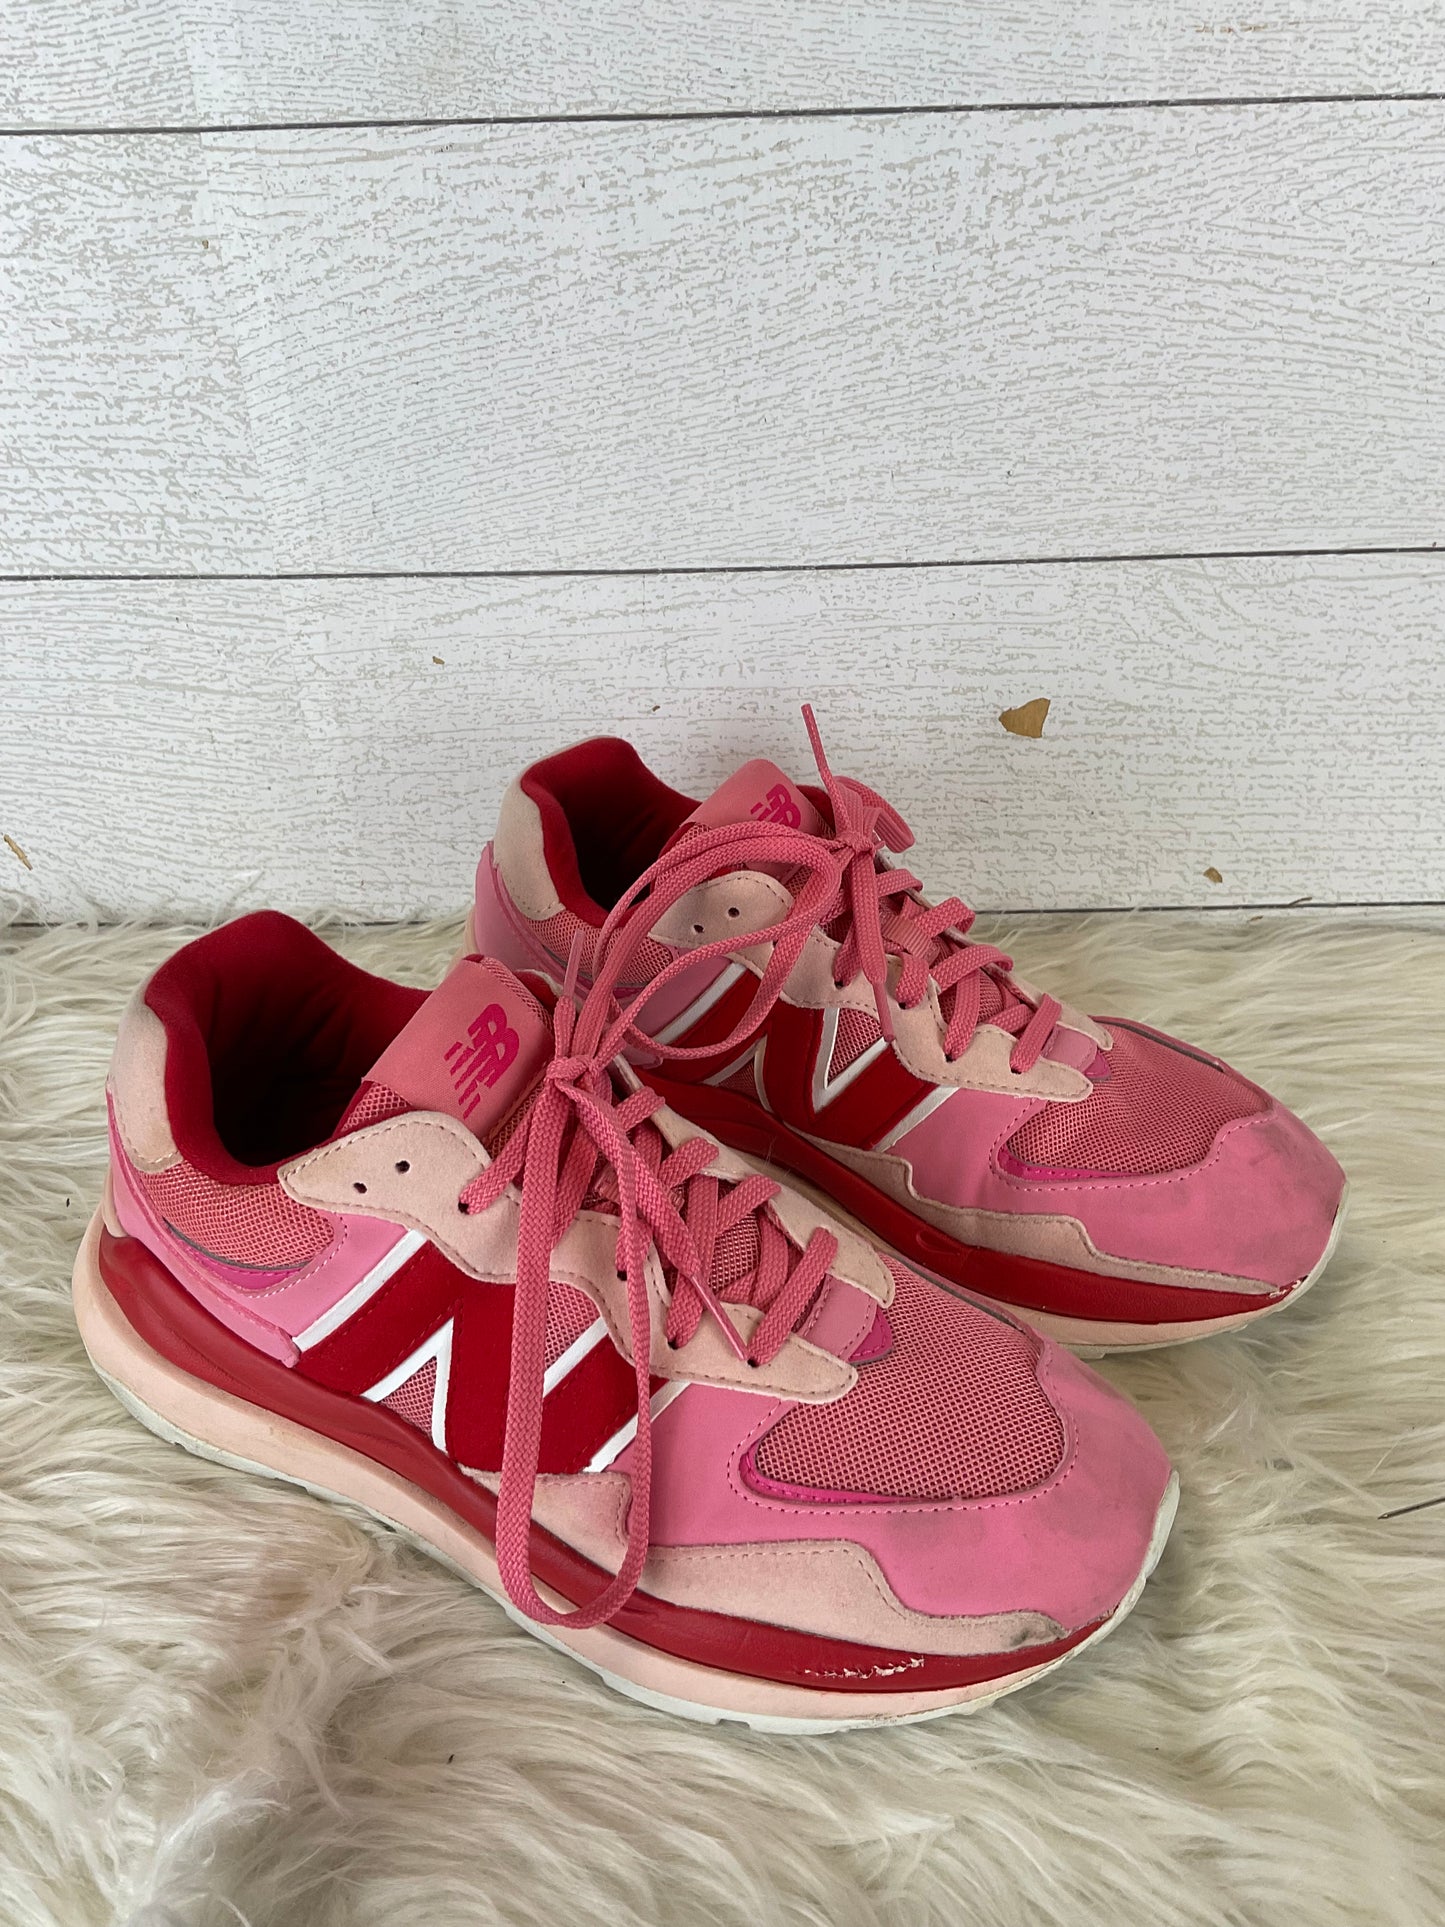 Shoes Sneakers By New Balance  Size: 6.5